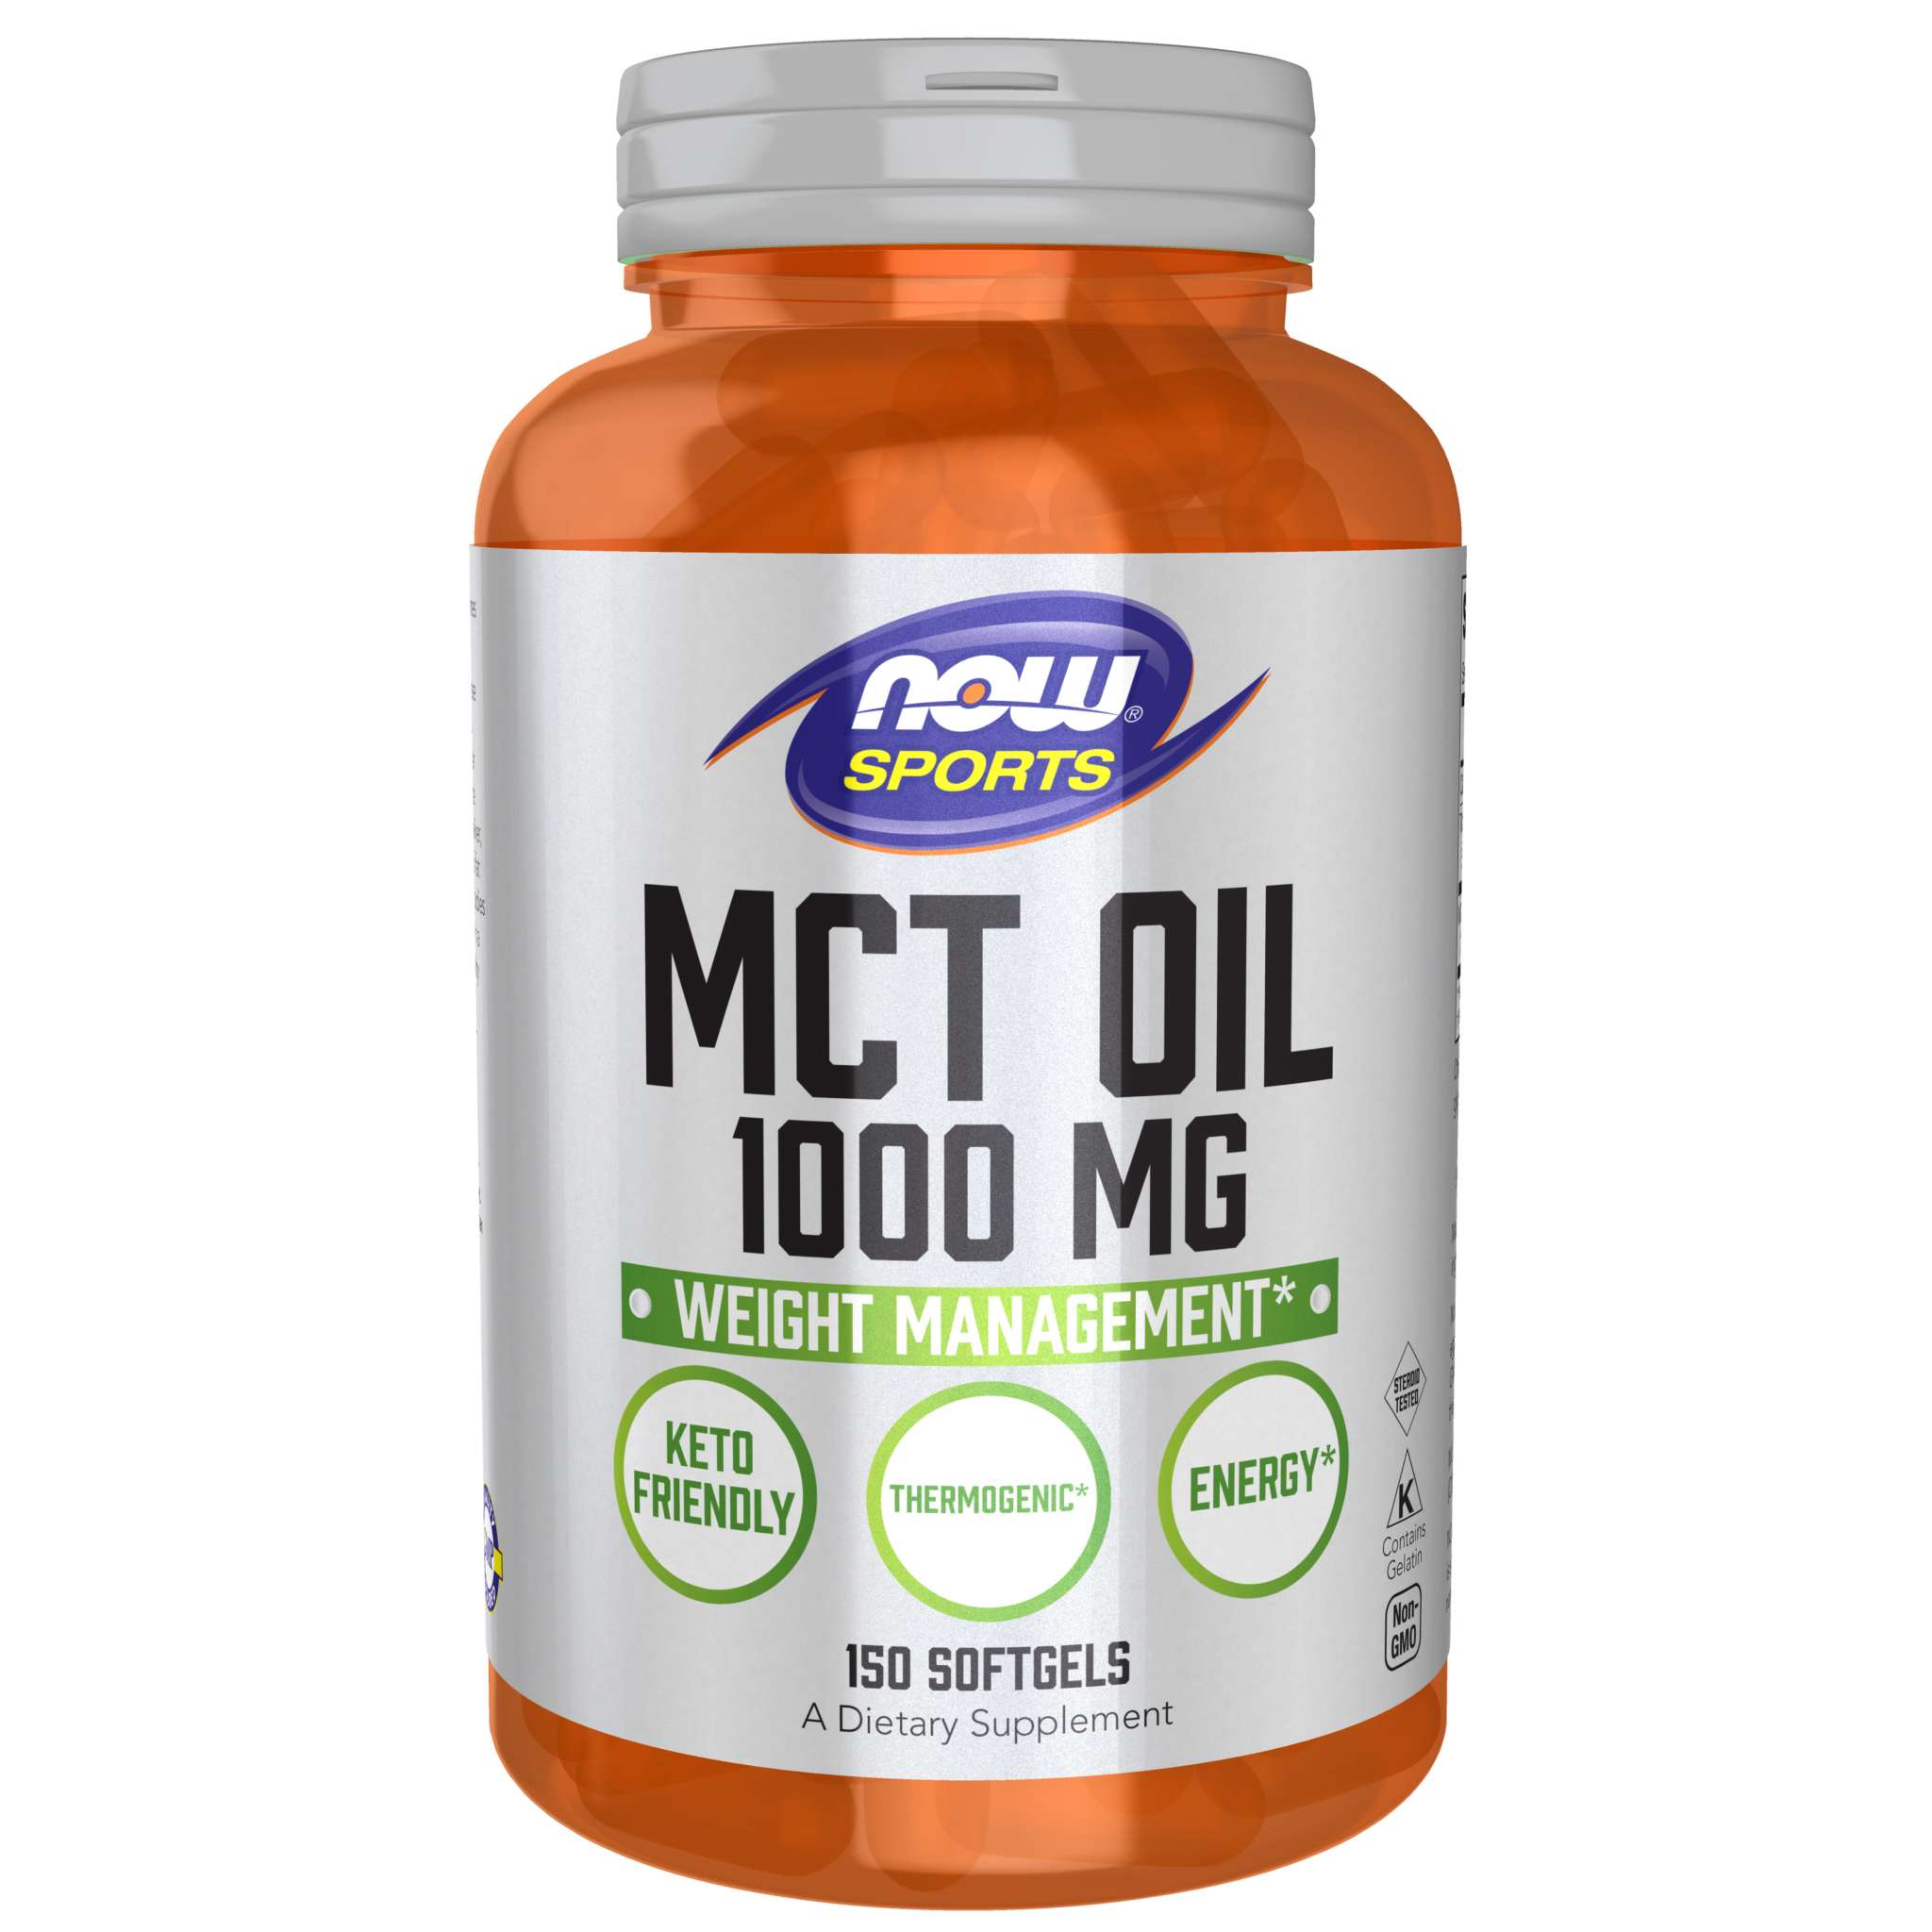 Now Foods - Mct Oil 1000 mg softgel